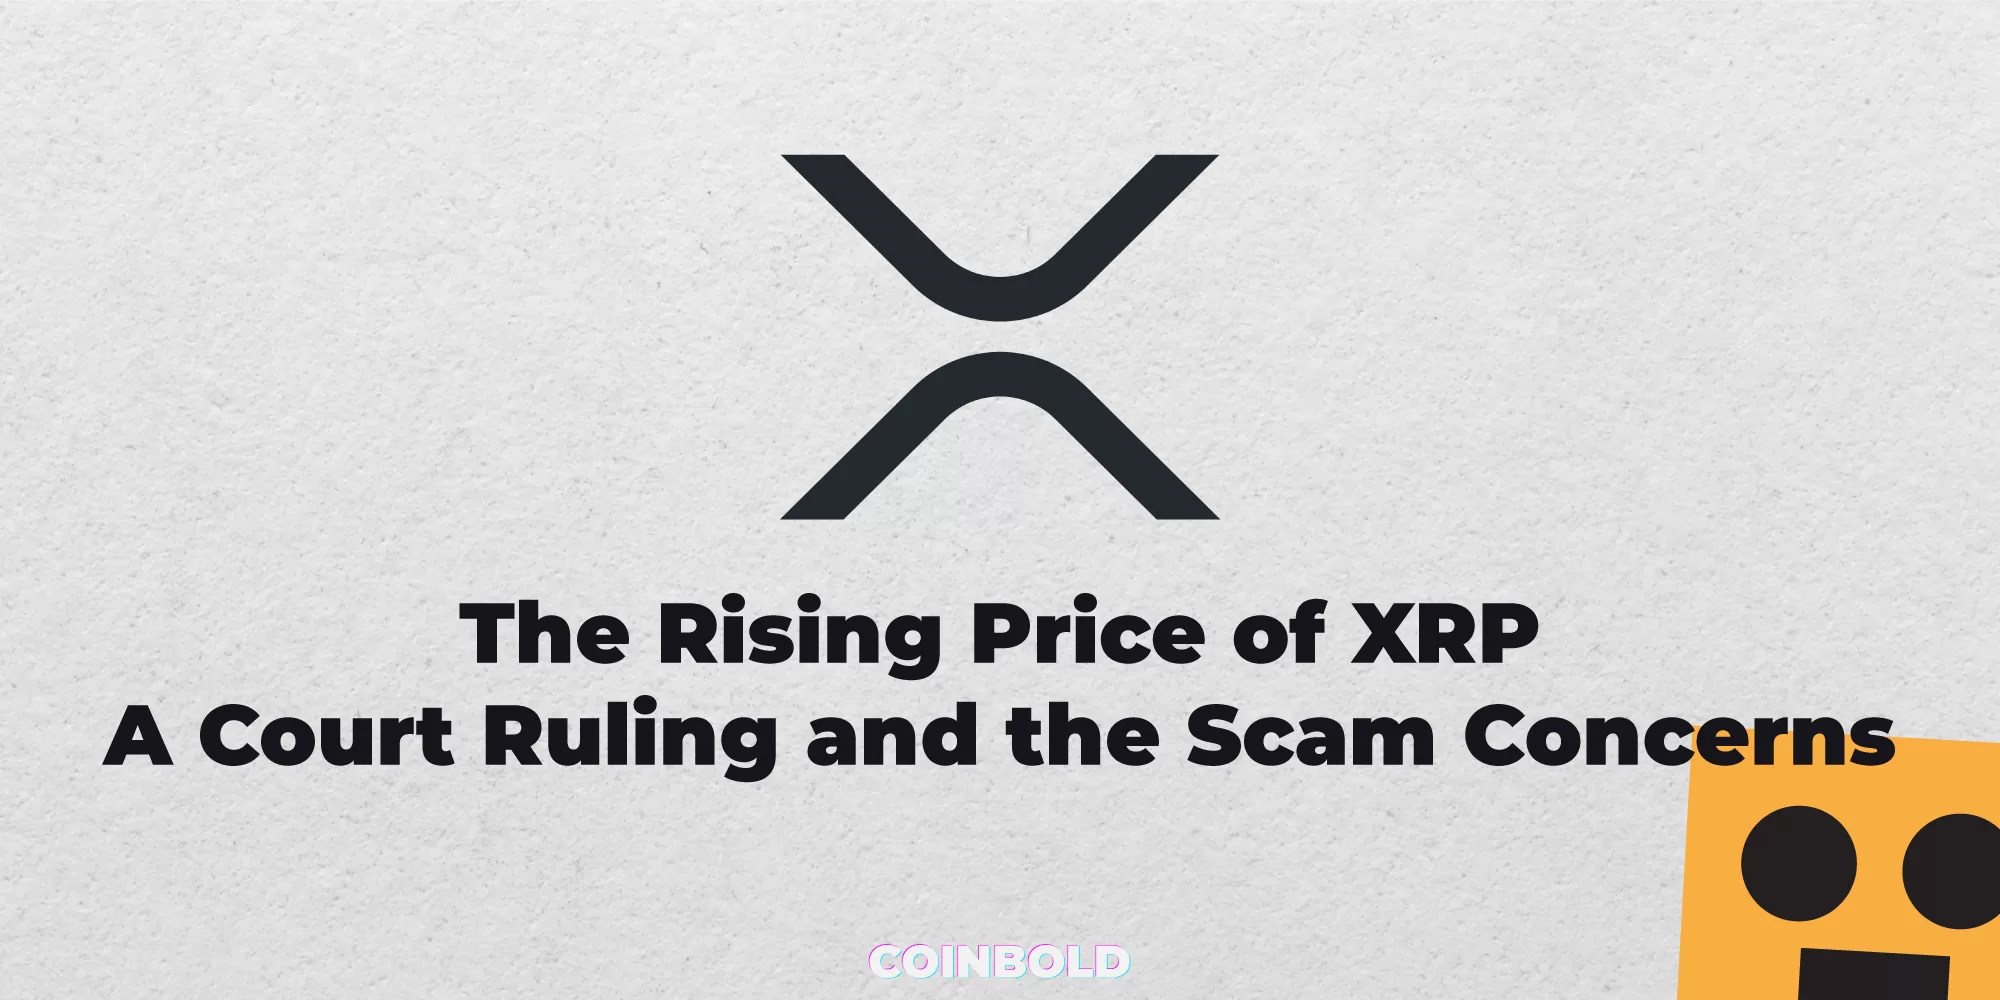 The Rising Price of XRP: A Court Ruling and the Scam Concerns